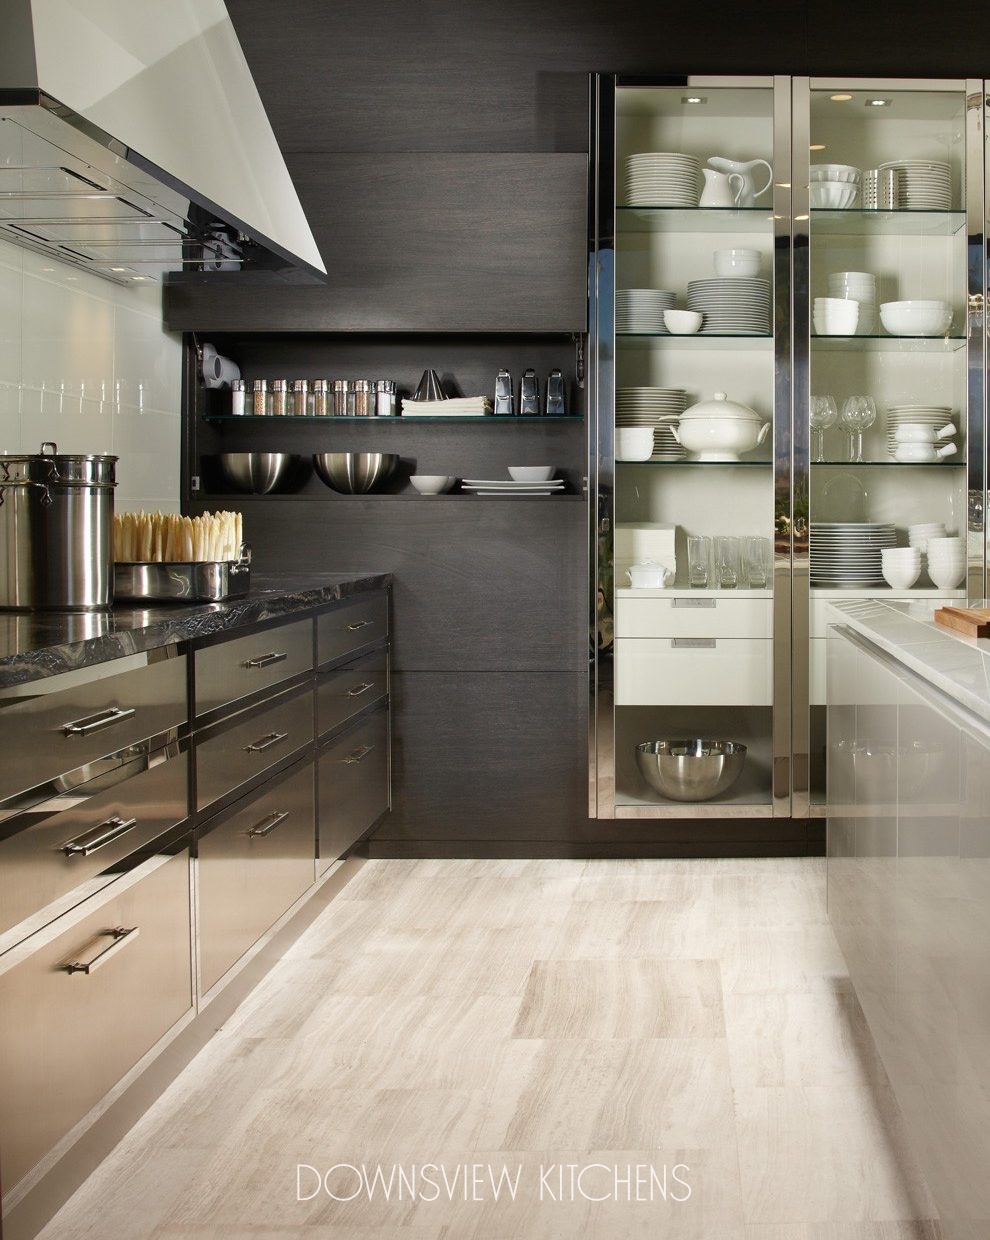 Modern Reflections Downsview Kitchens And Fine Custom Cabinetry Manufacturers Of Custom Kitchen Cabinets